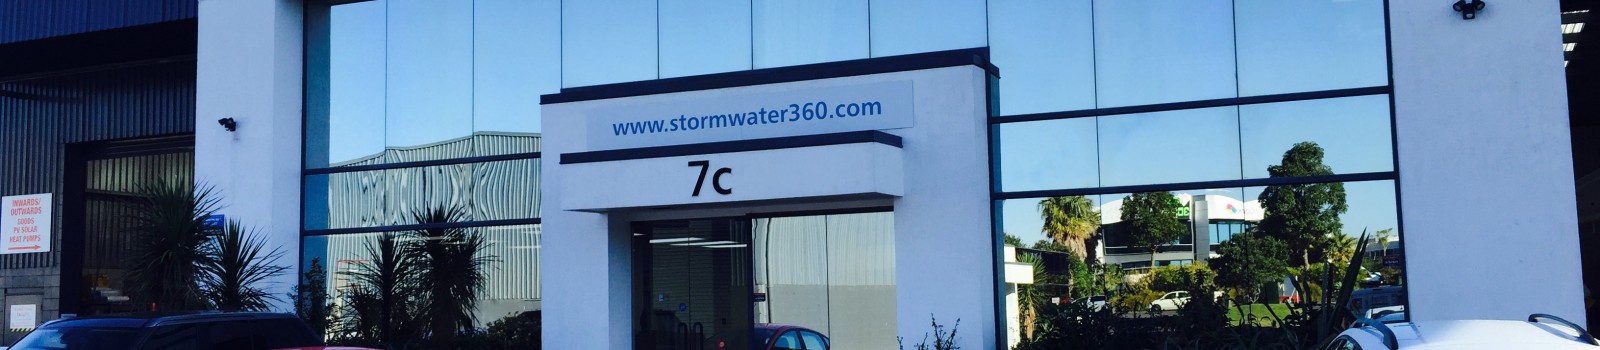 New premises for Stormwater360